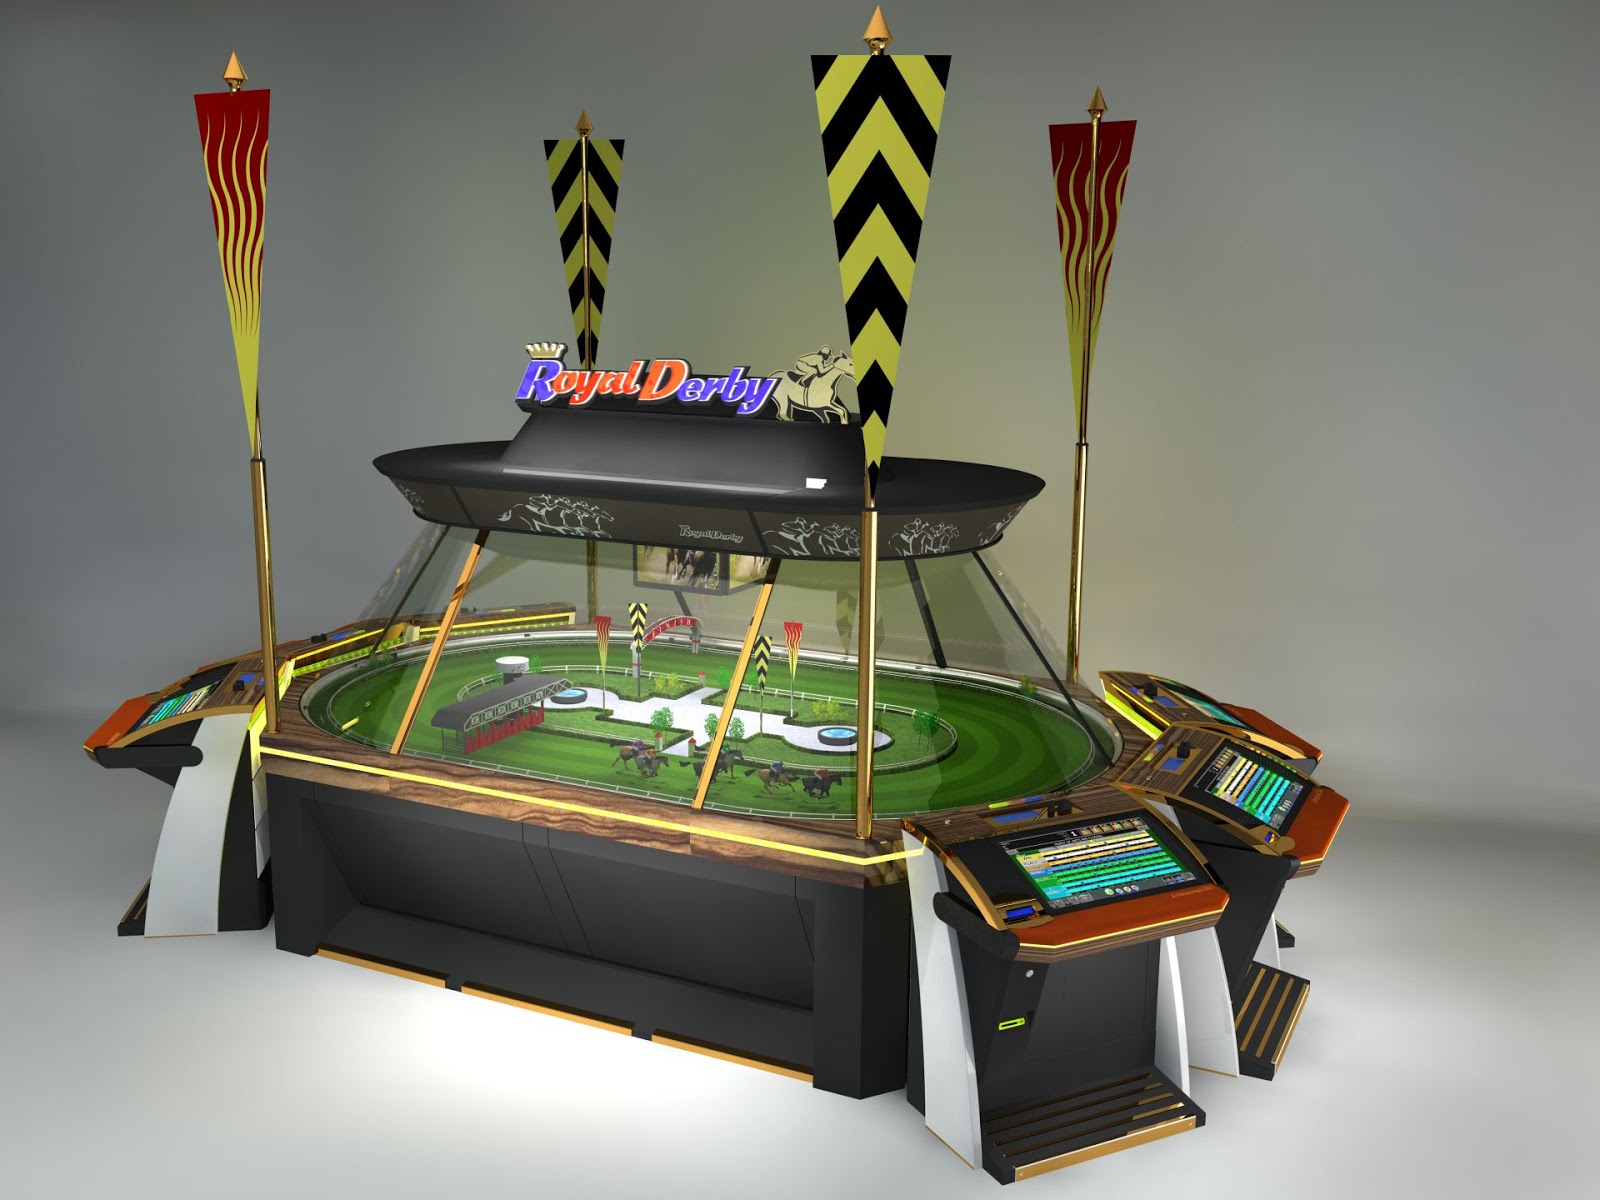 Royal Derby Casino Game